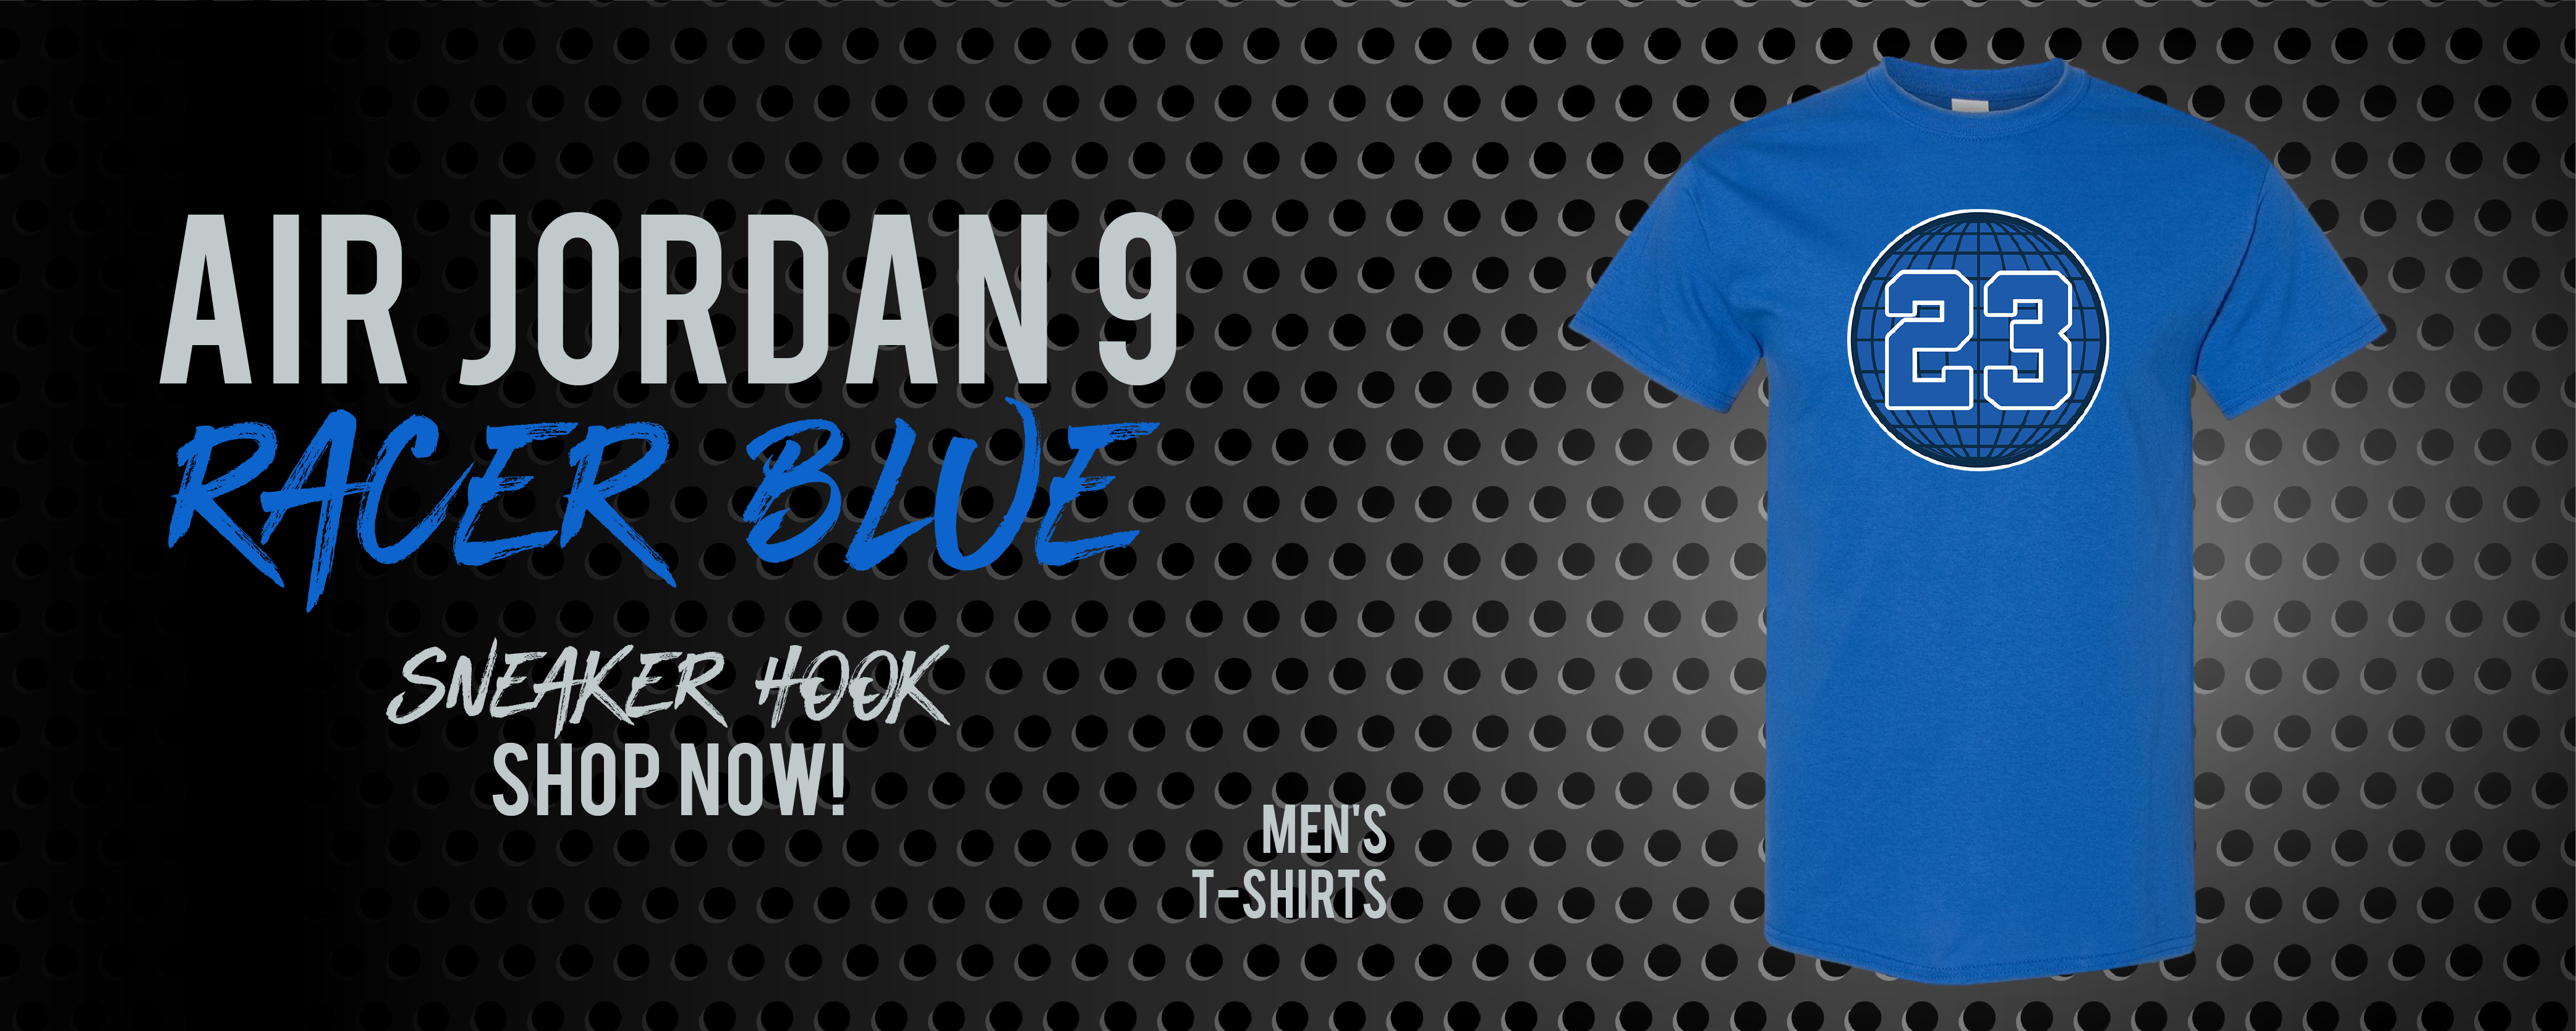 shirts to match racer blue 9s